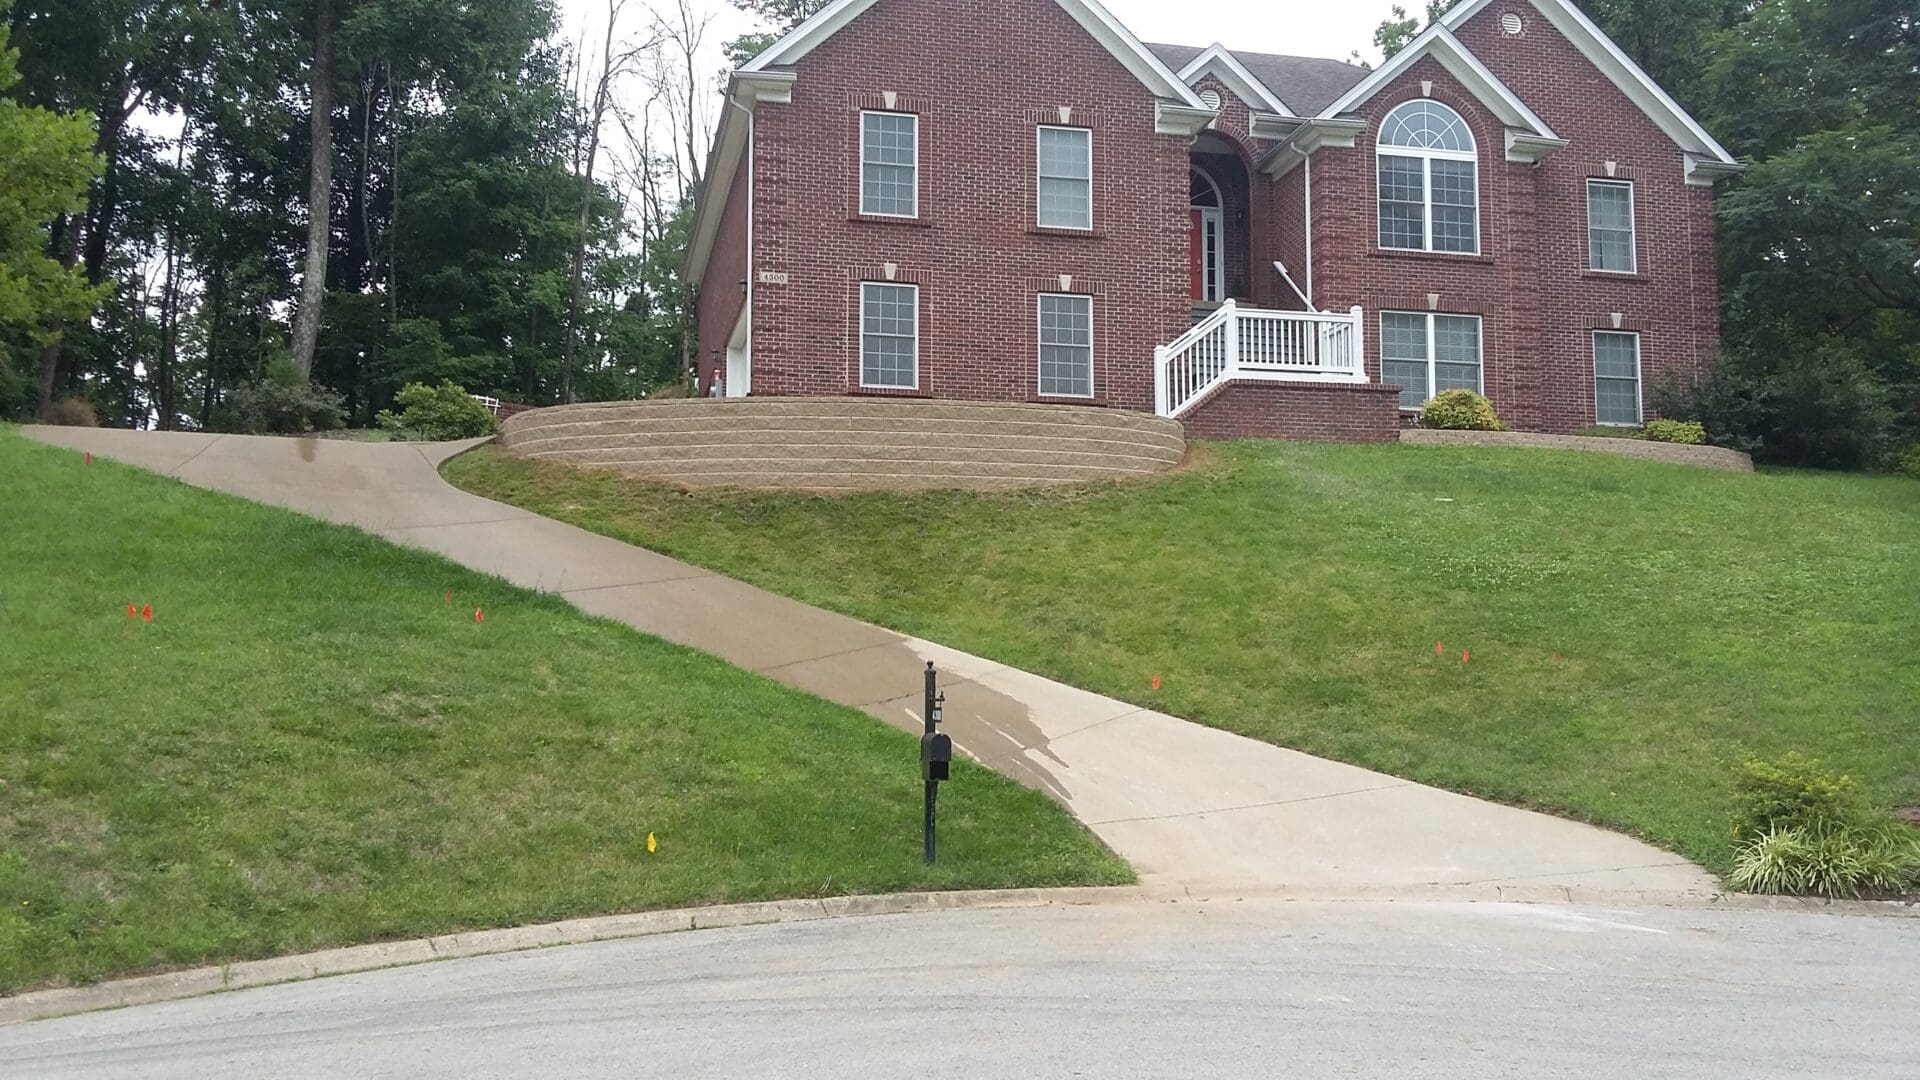 A house with a driveway and steps leading to it.